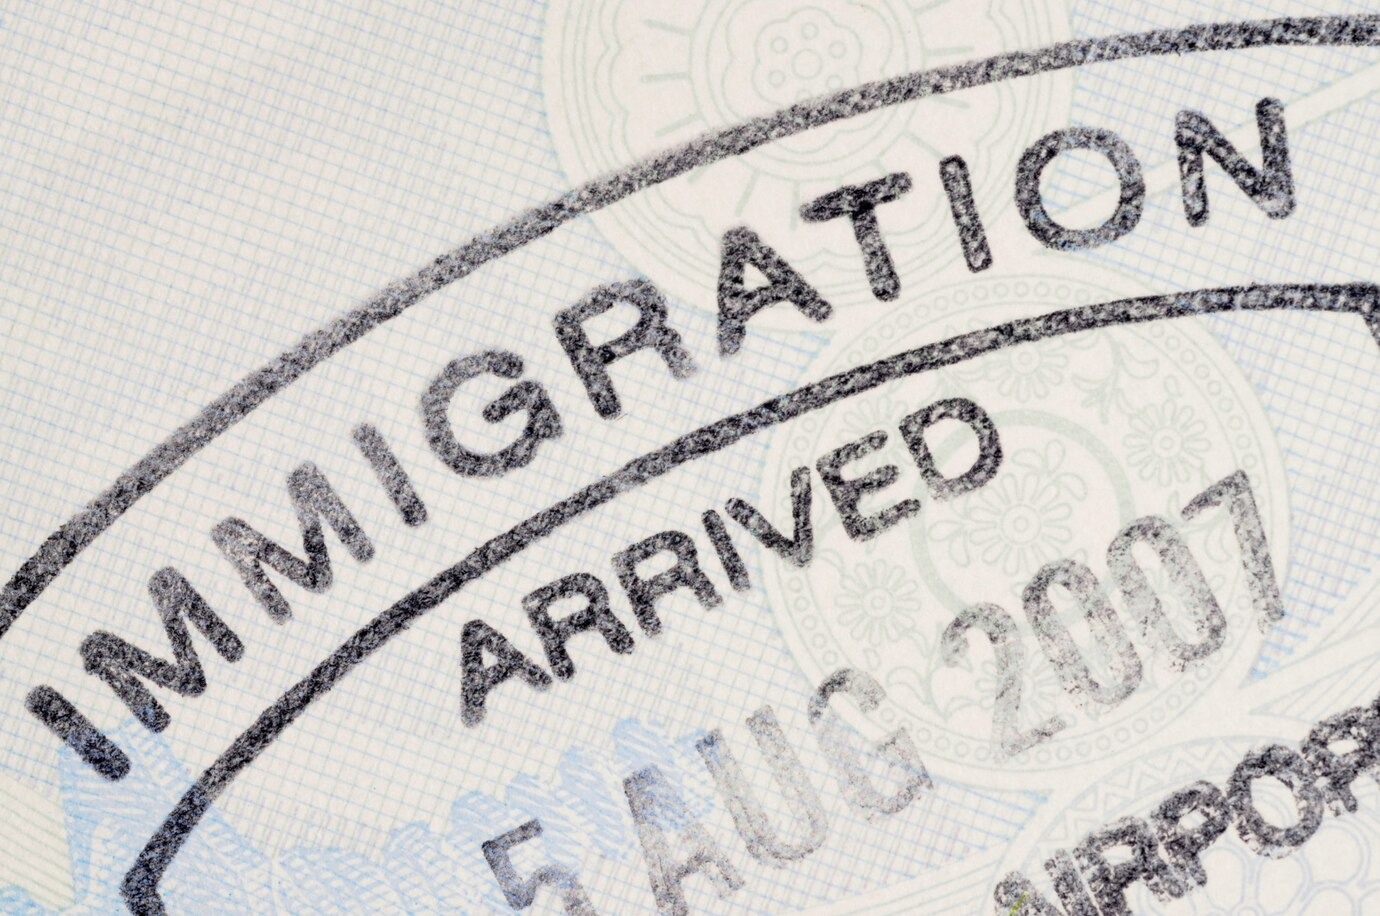 deportation and removal proceedings